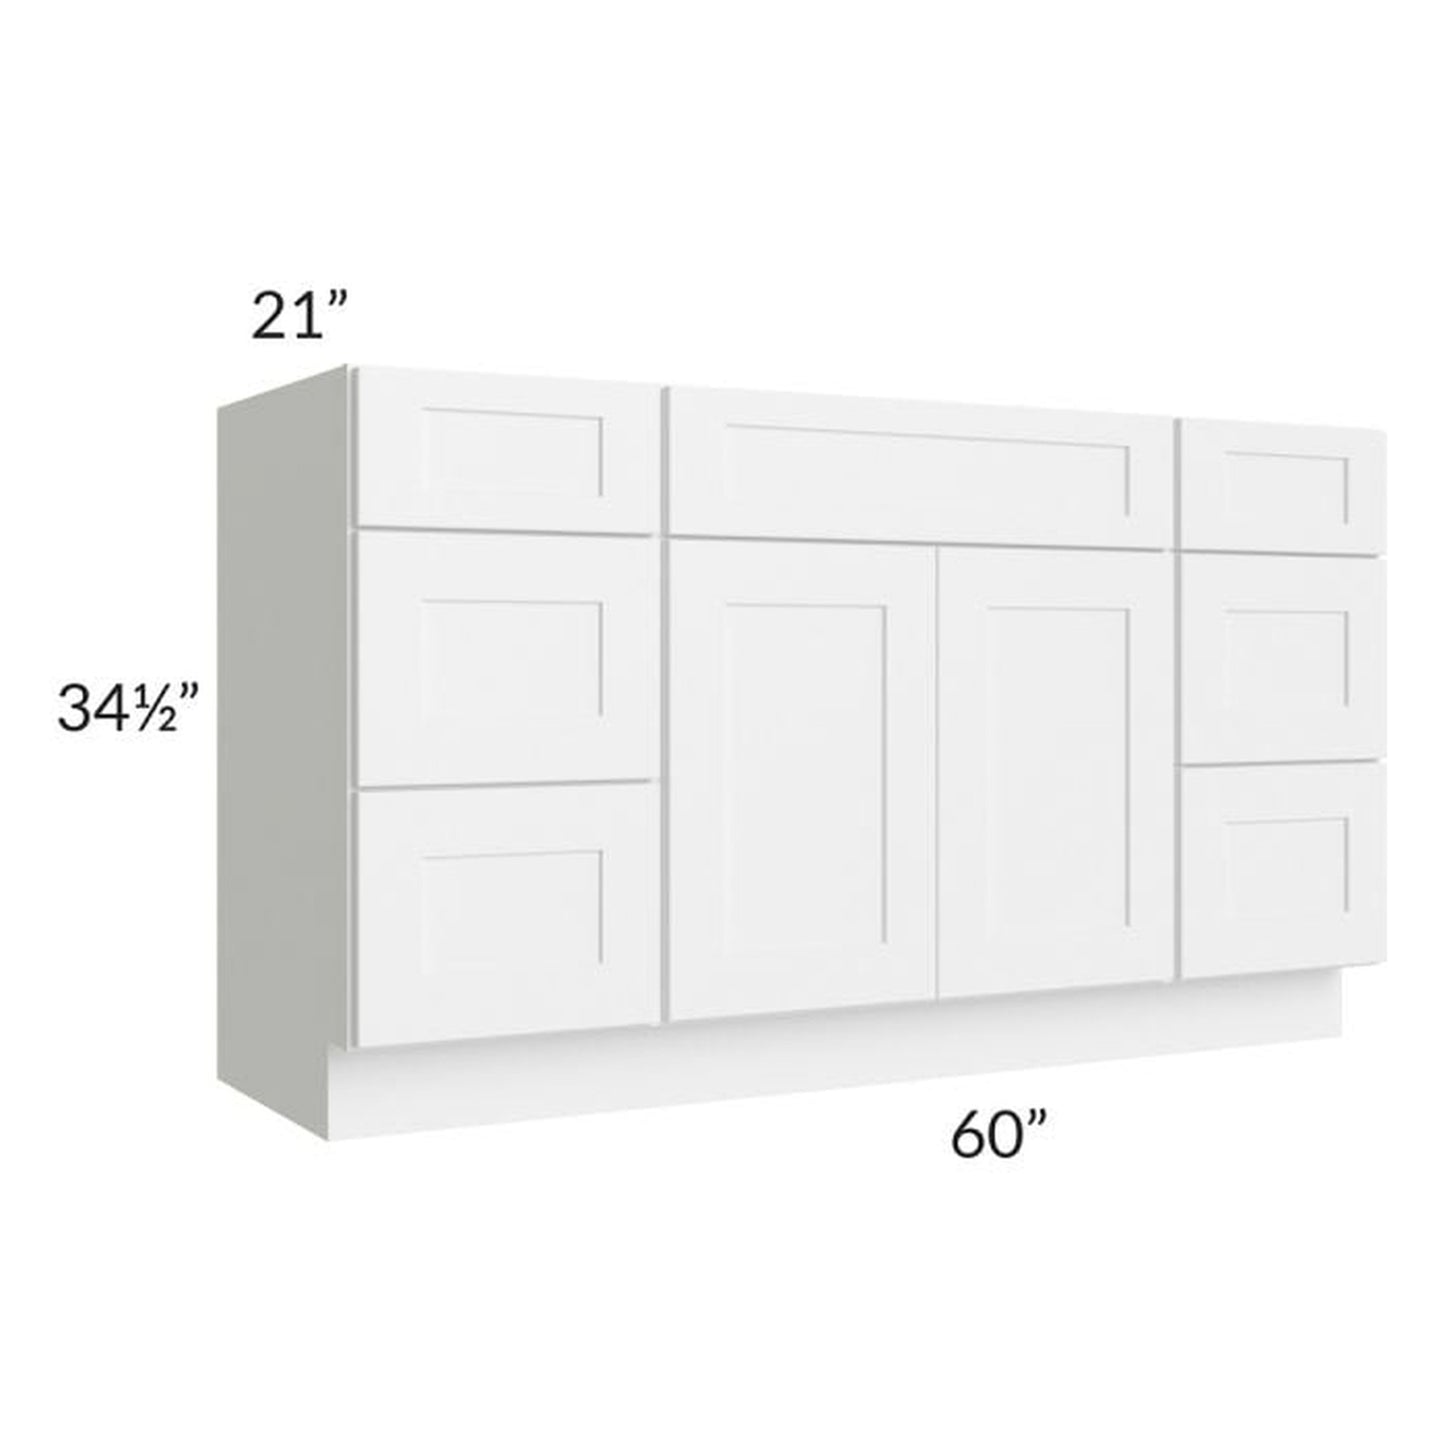 RTA Frosted White Shaker 60" Vanity Sink Base Cabinet with 6 Drawers and 2 Decorative End Panels